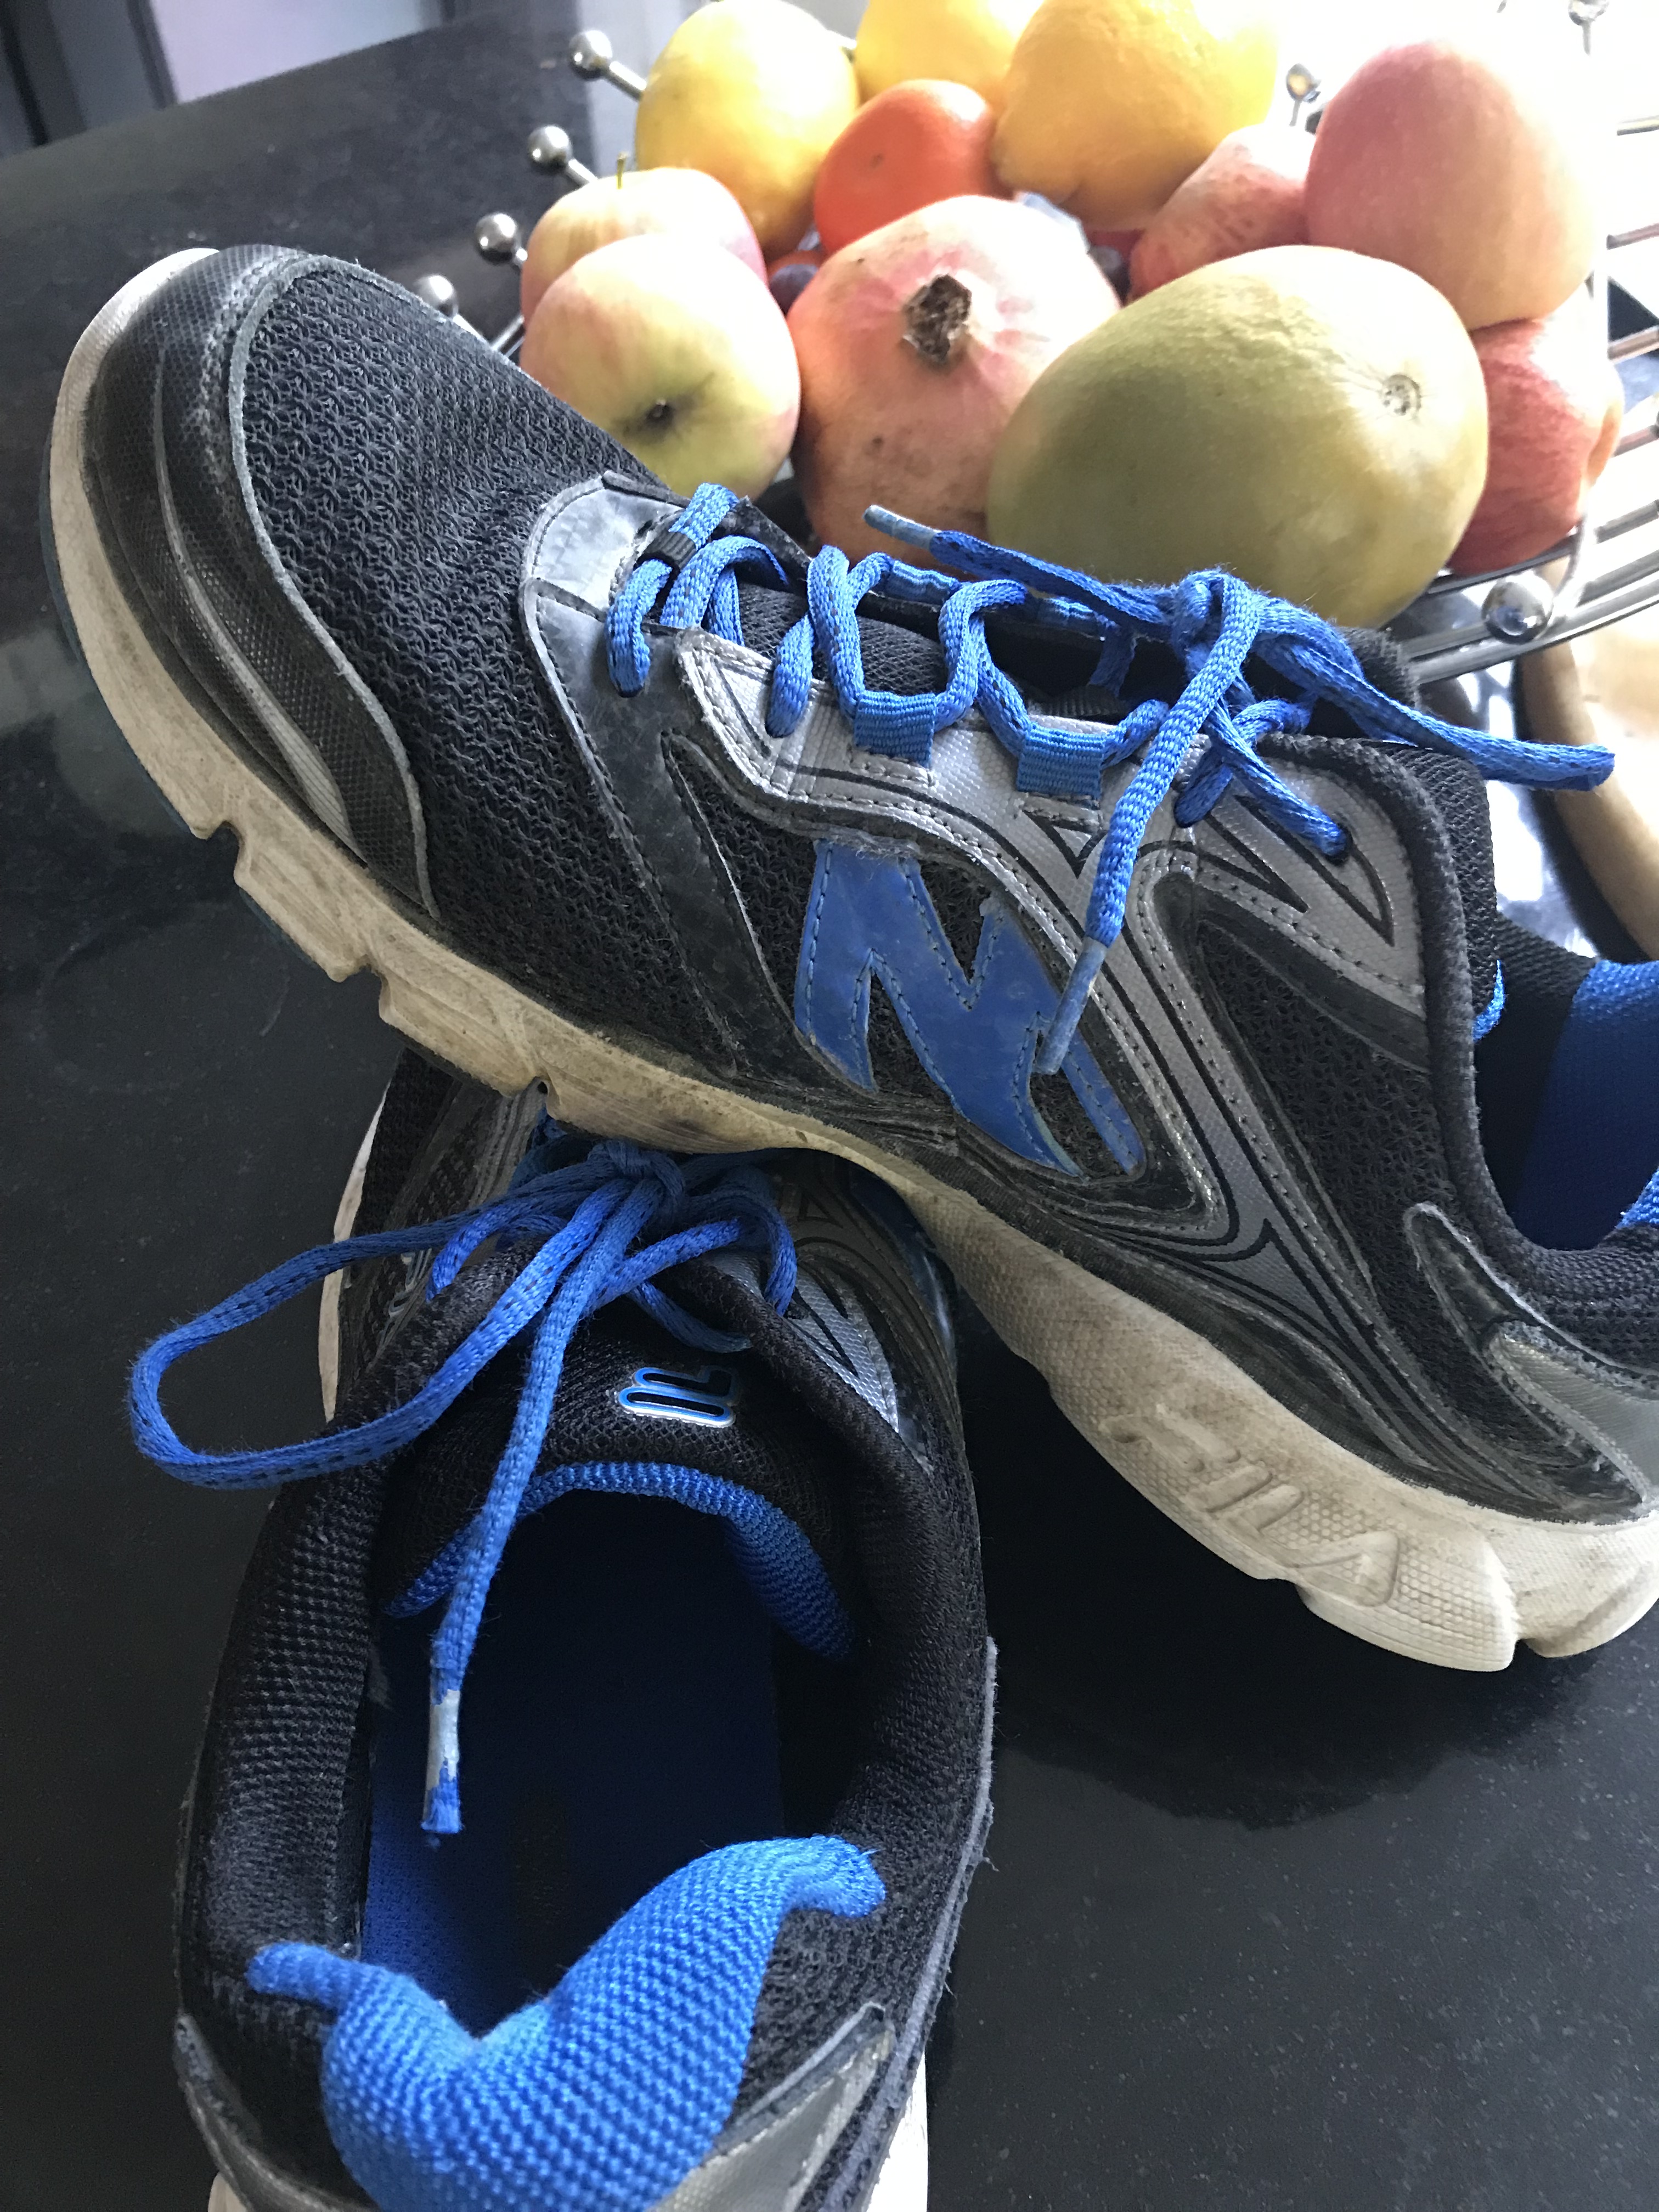 Peter's running shoes